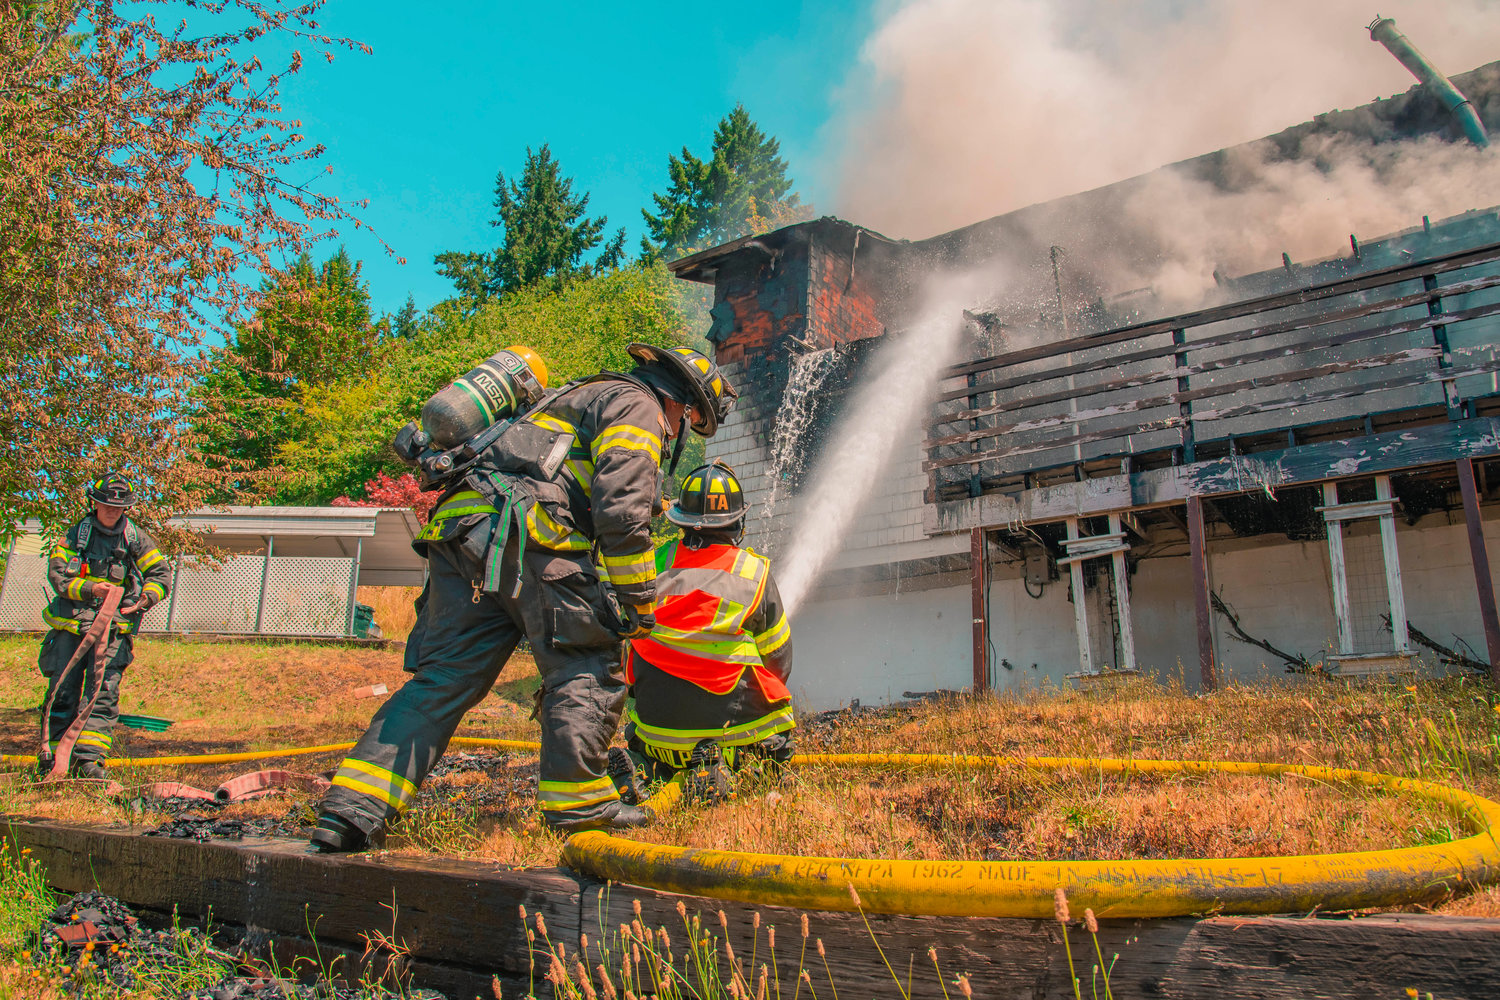 Riverside Fire Authority firefighters use hoses to put out flames at a residential structure on East Third Street in Centralia on Thursday.